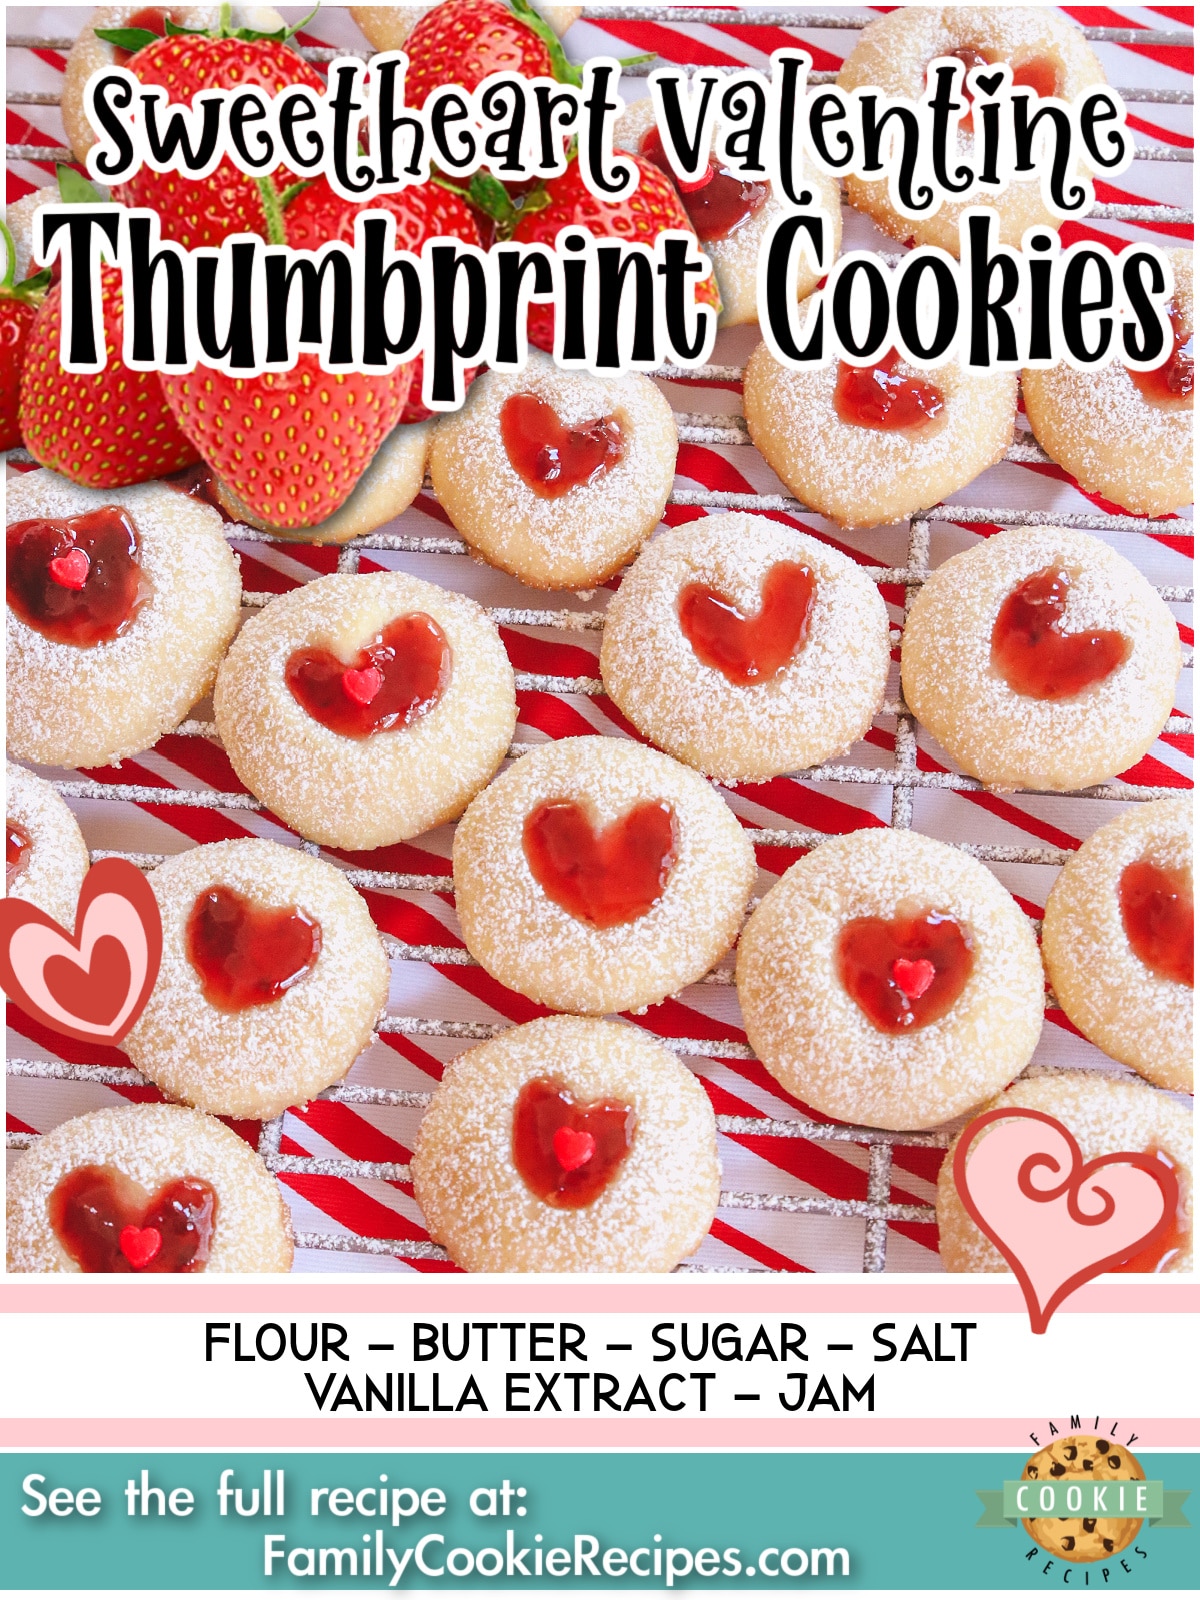 Sweetheart Valentine Thumbprint Cookies are a perfect sweet treat to bake! They're tender, buttery cookies filled with sweet berry jam in the shape of a heart!